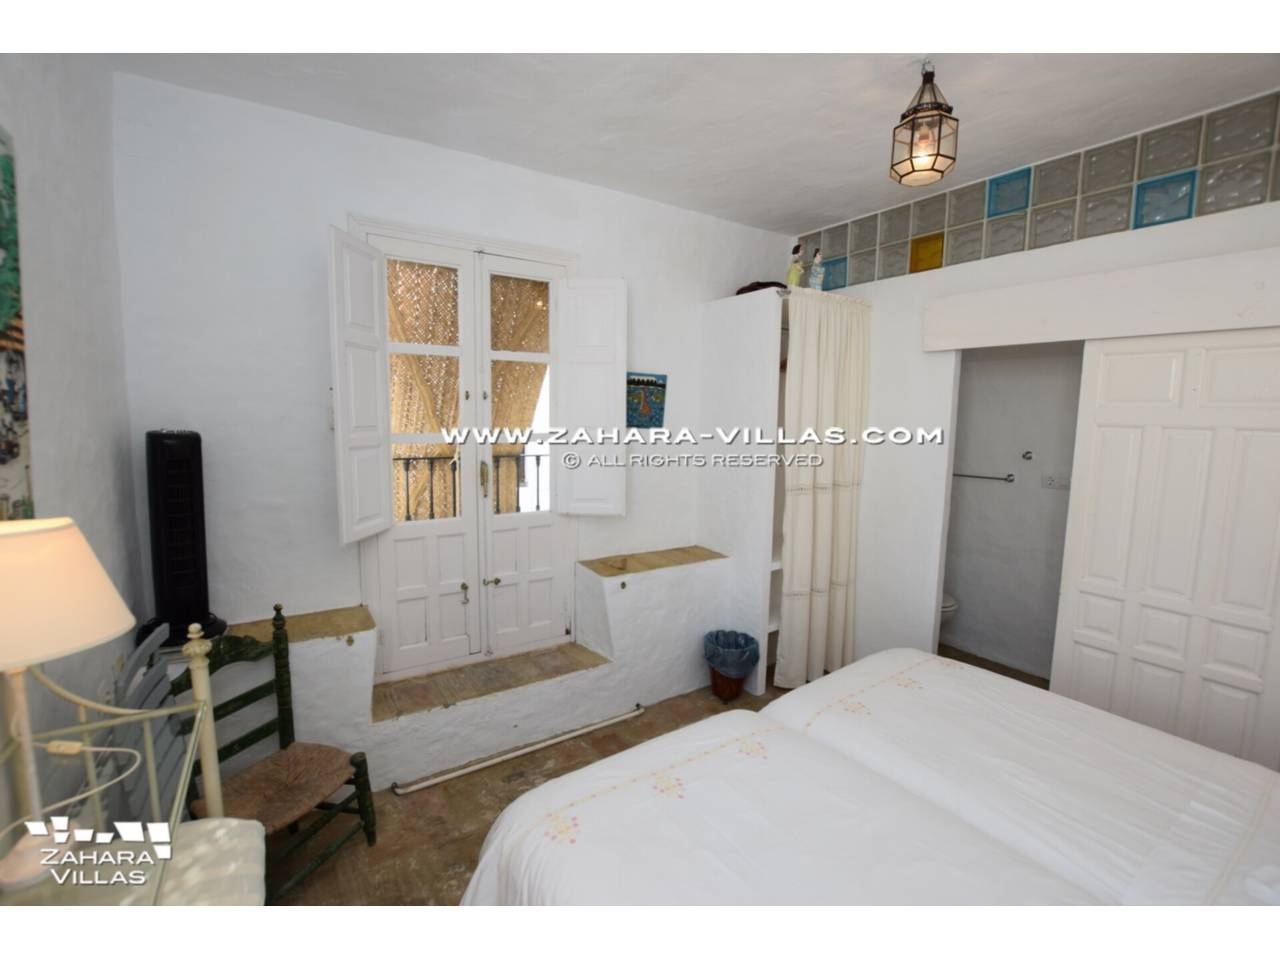 Imagen 61 de Magnificent House with central patio, in the historic center of the town